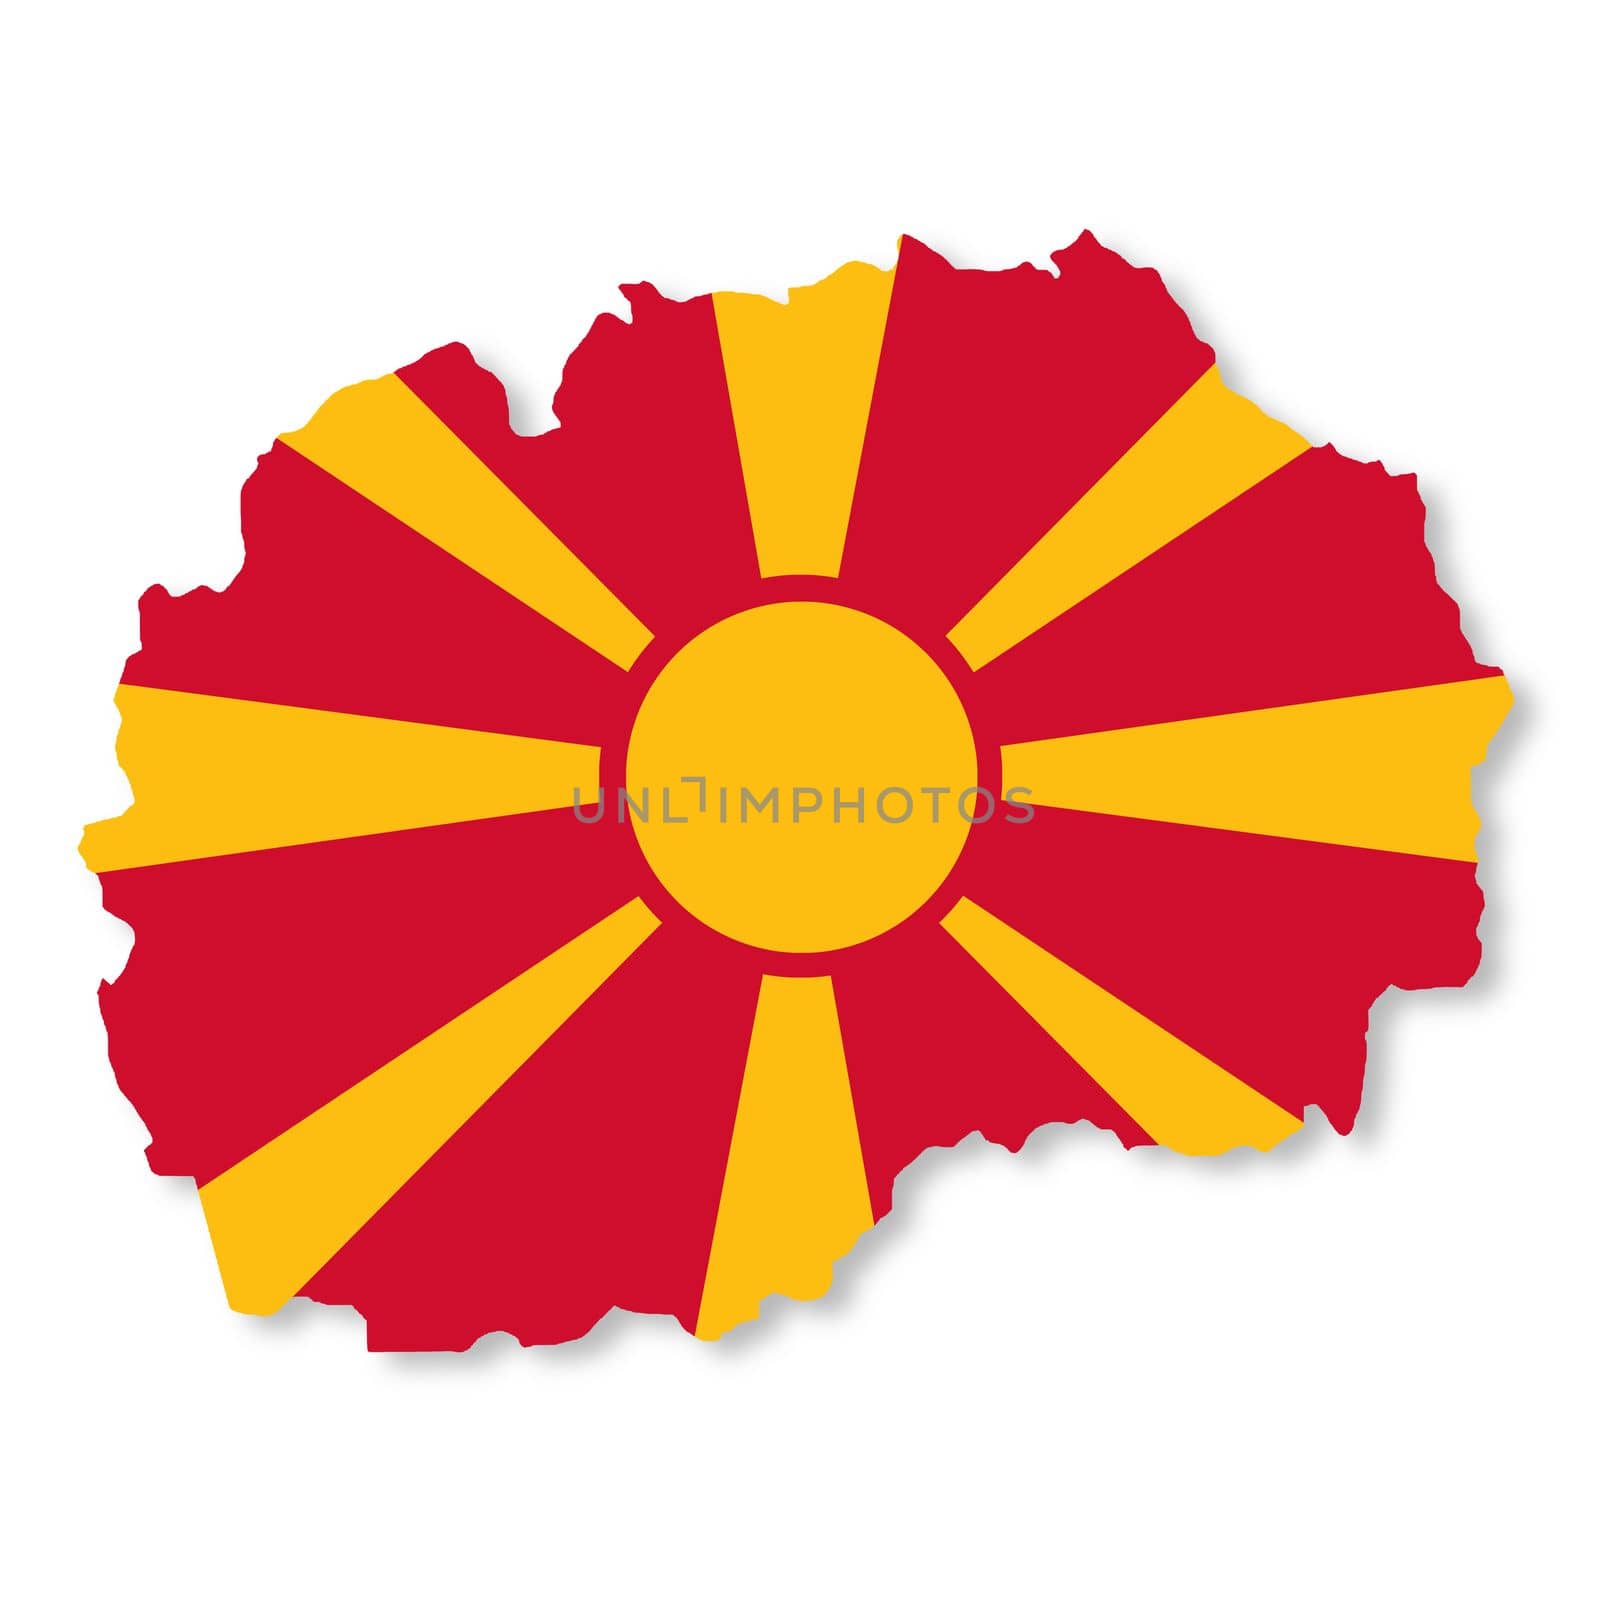 North Macedonia flag map with clipping path 3d illustration by VivacityImages